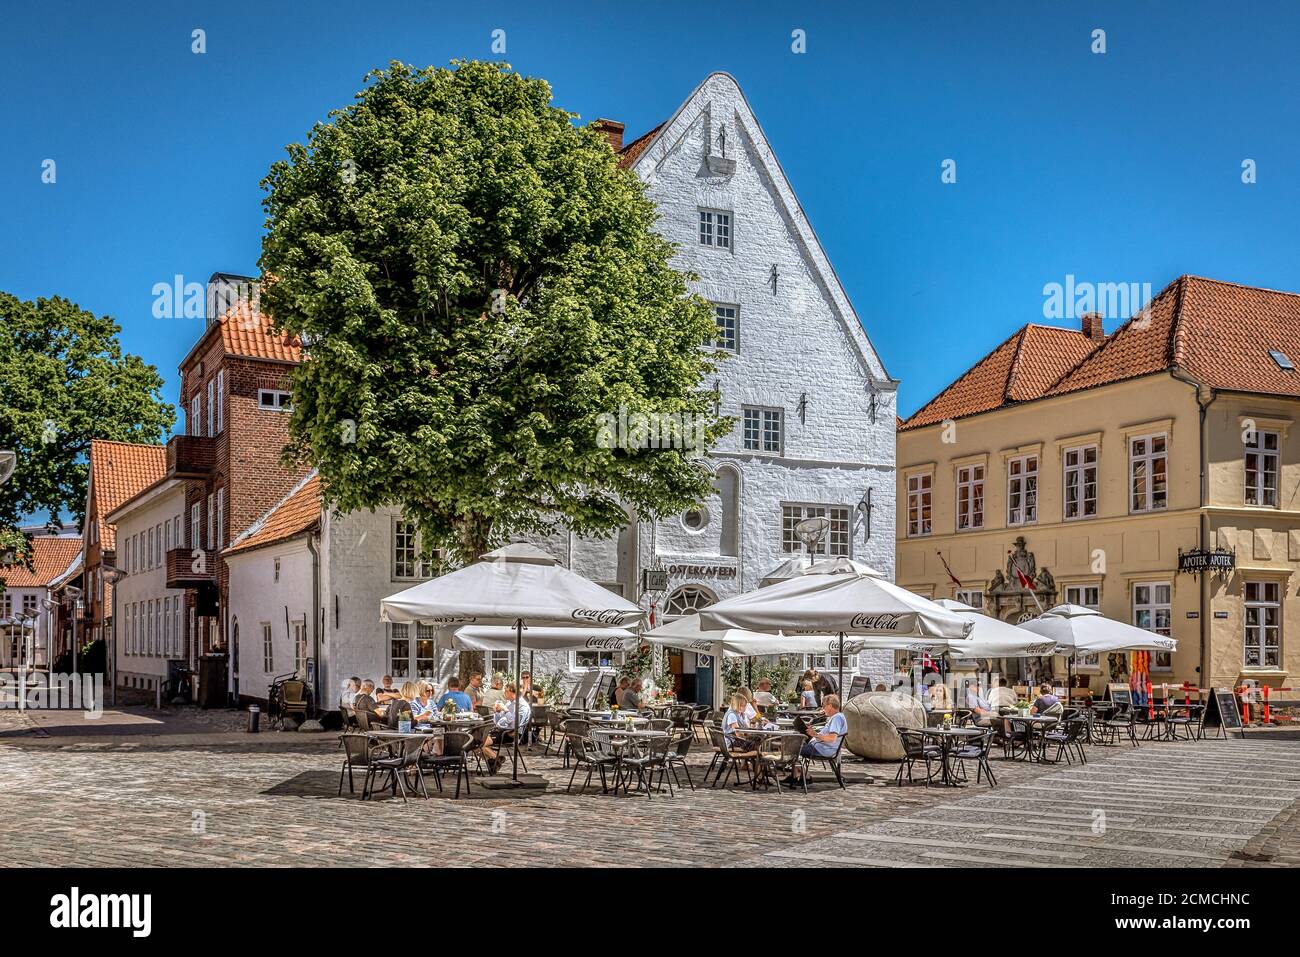 Restaurants in the sunshine with parasols at the square in Tonder, Denmark, June 1, 2020 Stock Photo